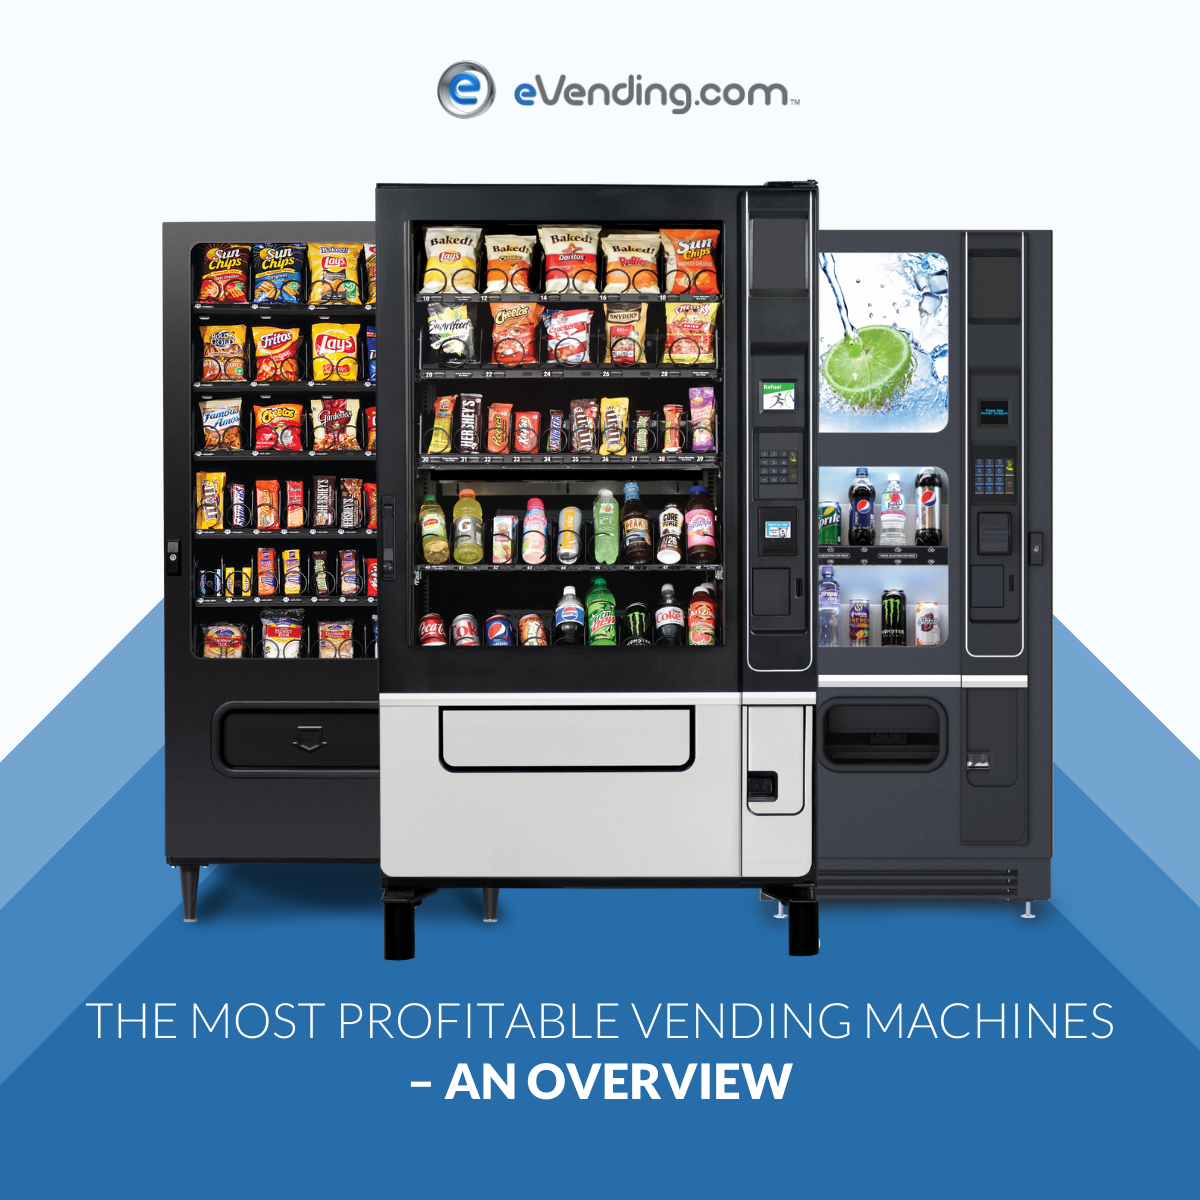 THE MOST PROFITABLE VENDING MACHINES – AN OVERVIEW